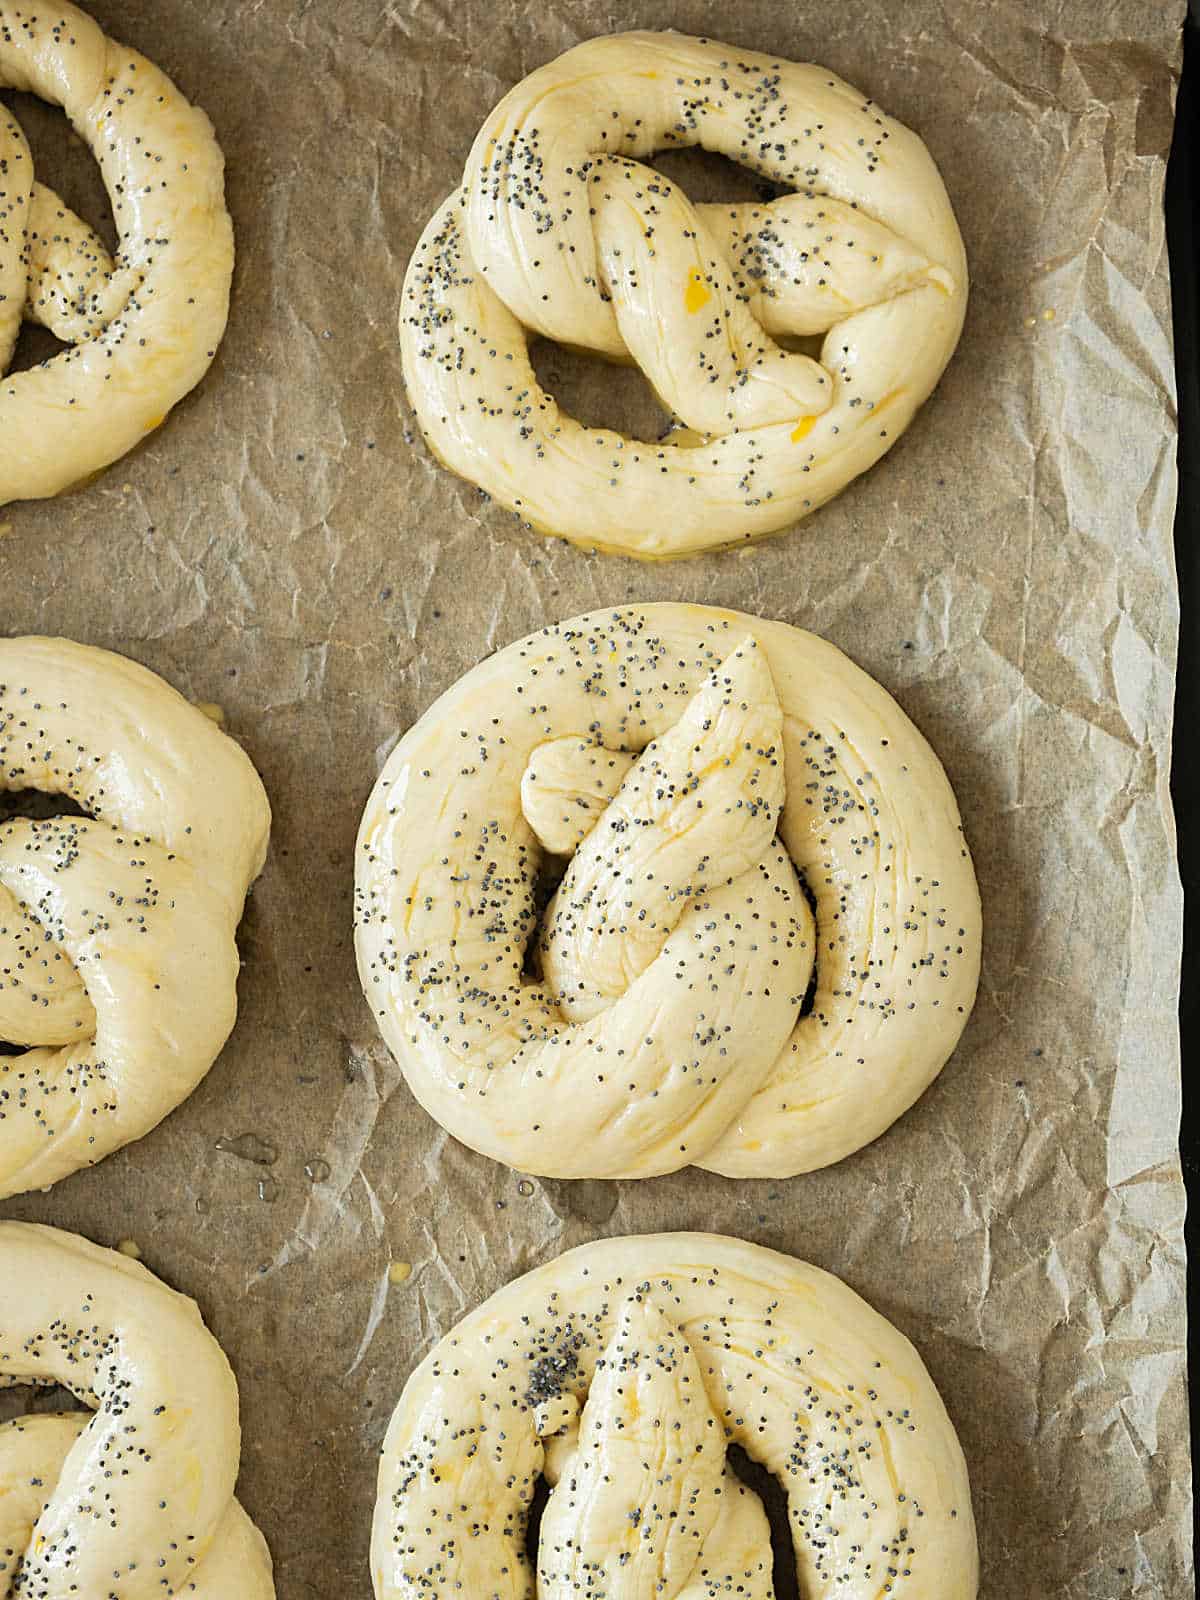 Poppy seed topped pretzels before baking on beige paper.